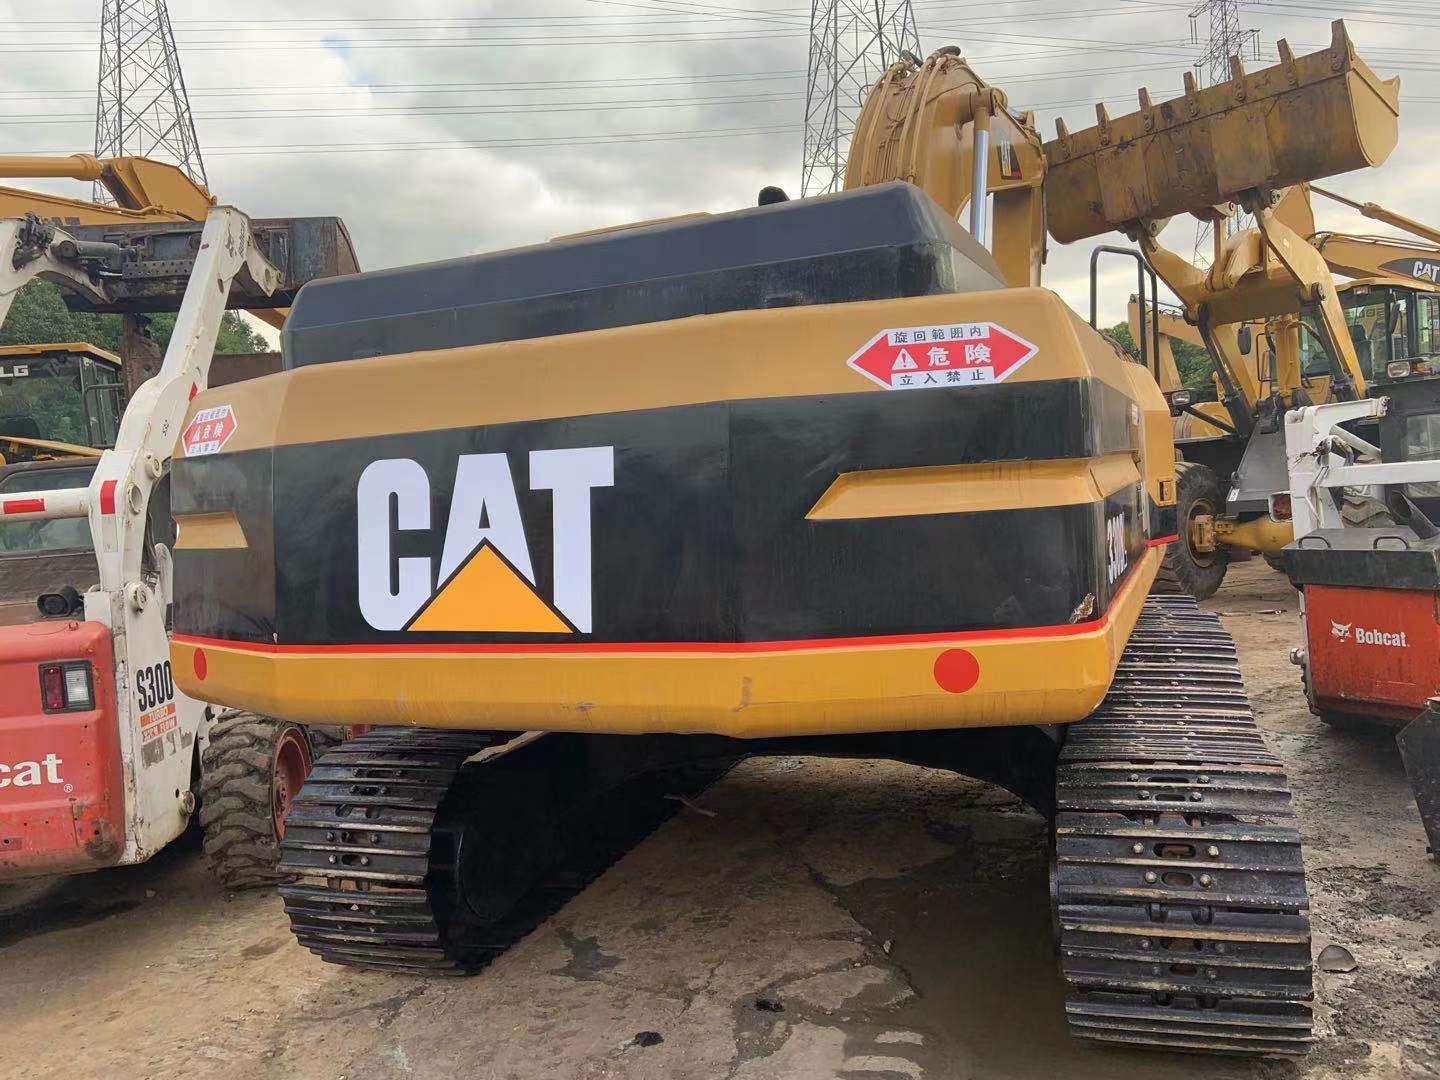 Used Cat 330bl Excavator with High Quality for Sale, Secondhand Cat 330/330b Excavator